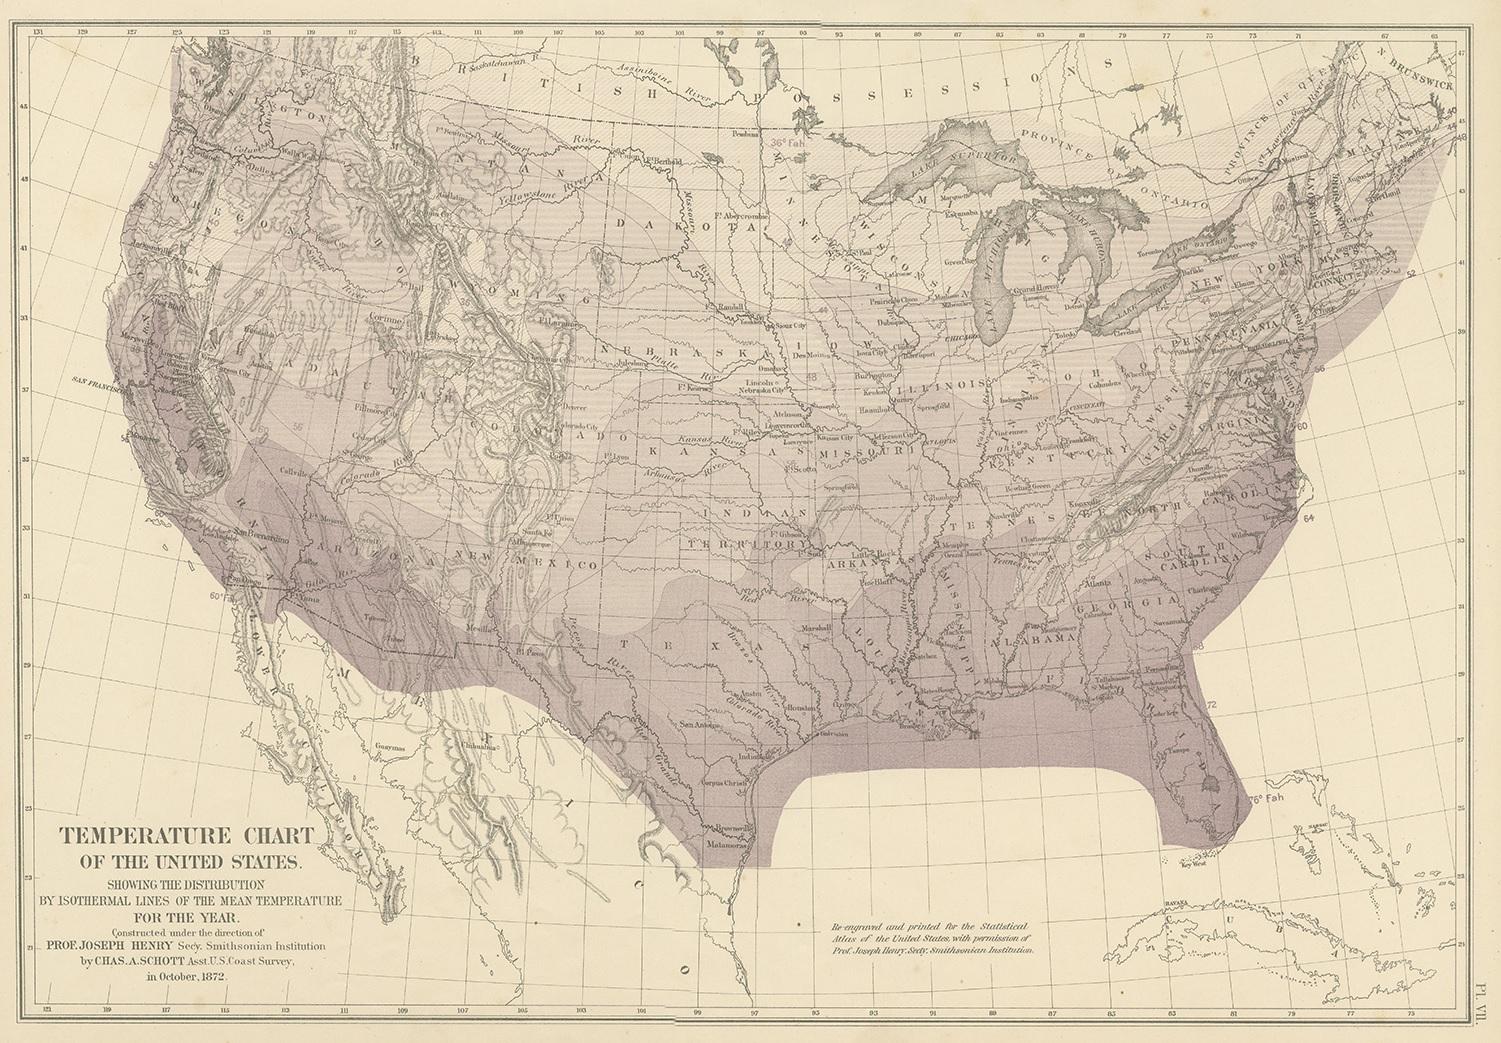 Antique chart titled 'Temperature chart of the United States. Showing the distribution by isothermal lines of the mean temperature for the year. Constructed under the direction of Prof. Joseph Henry, Sec'y. Smithsonian Institution by Chas. A.